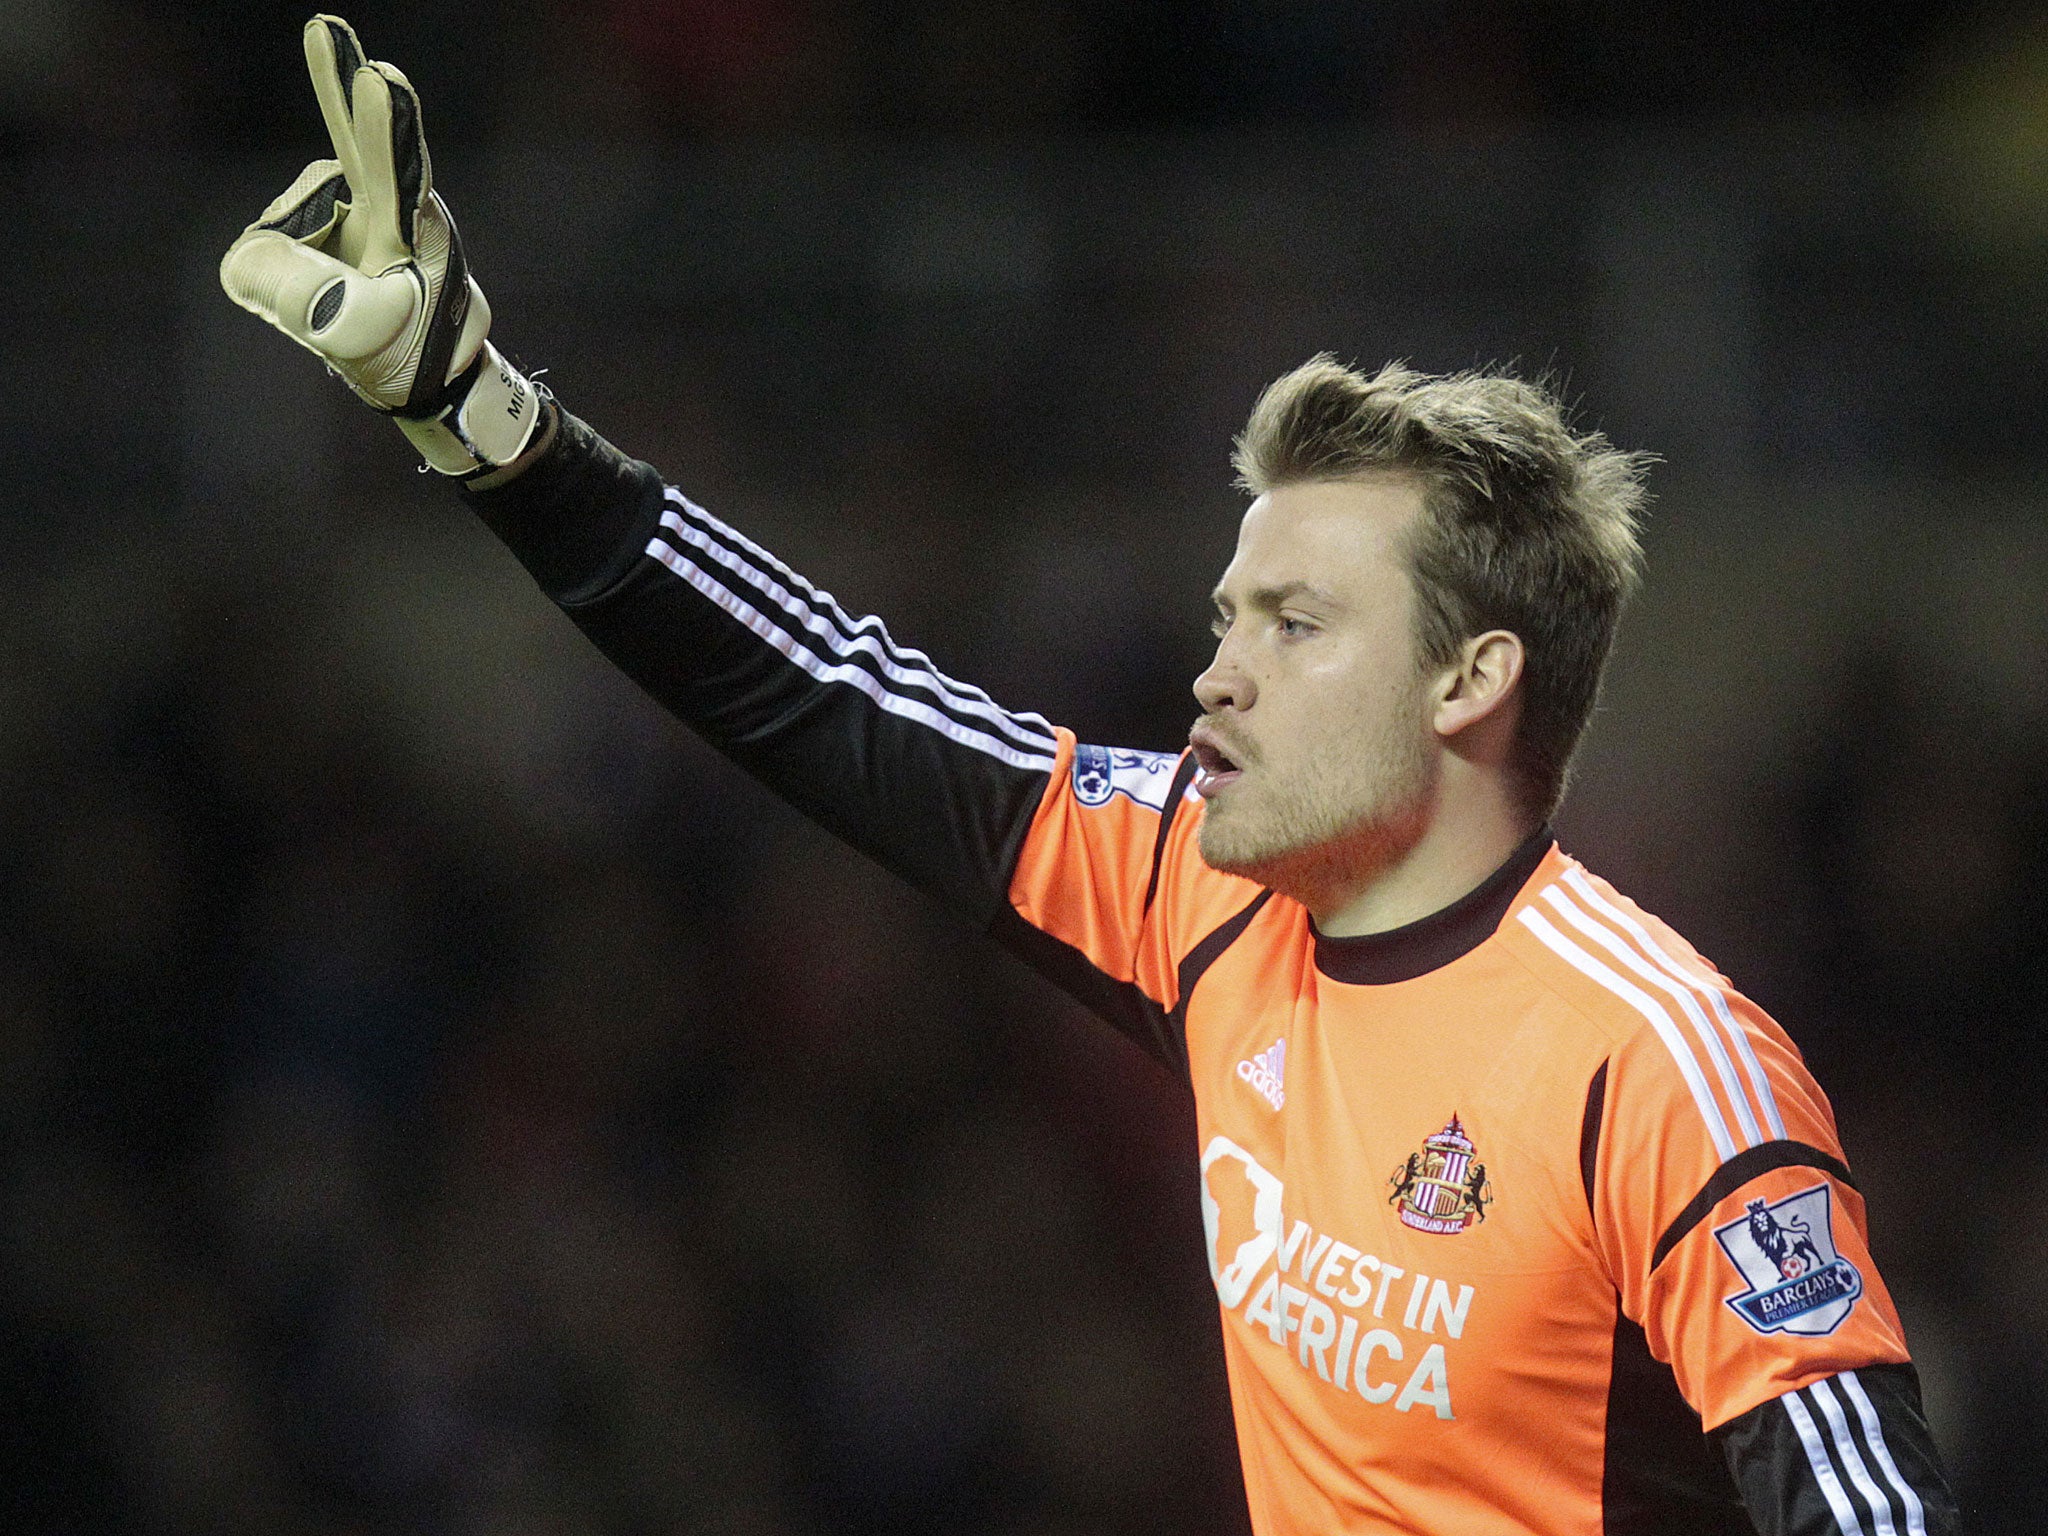 Mignolet, 25, has been in fine form for Sunderland, attracting the attention of Arsenal manager Arsene Wenger and former Manchester United boss Alex Ferguson